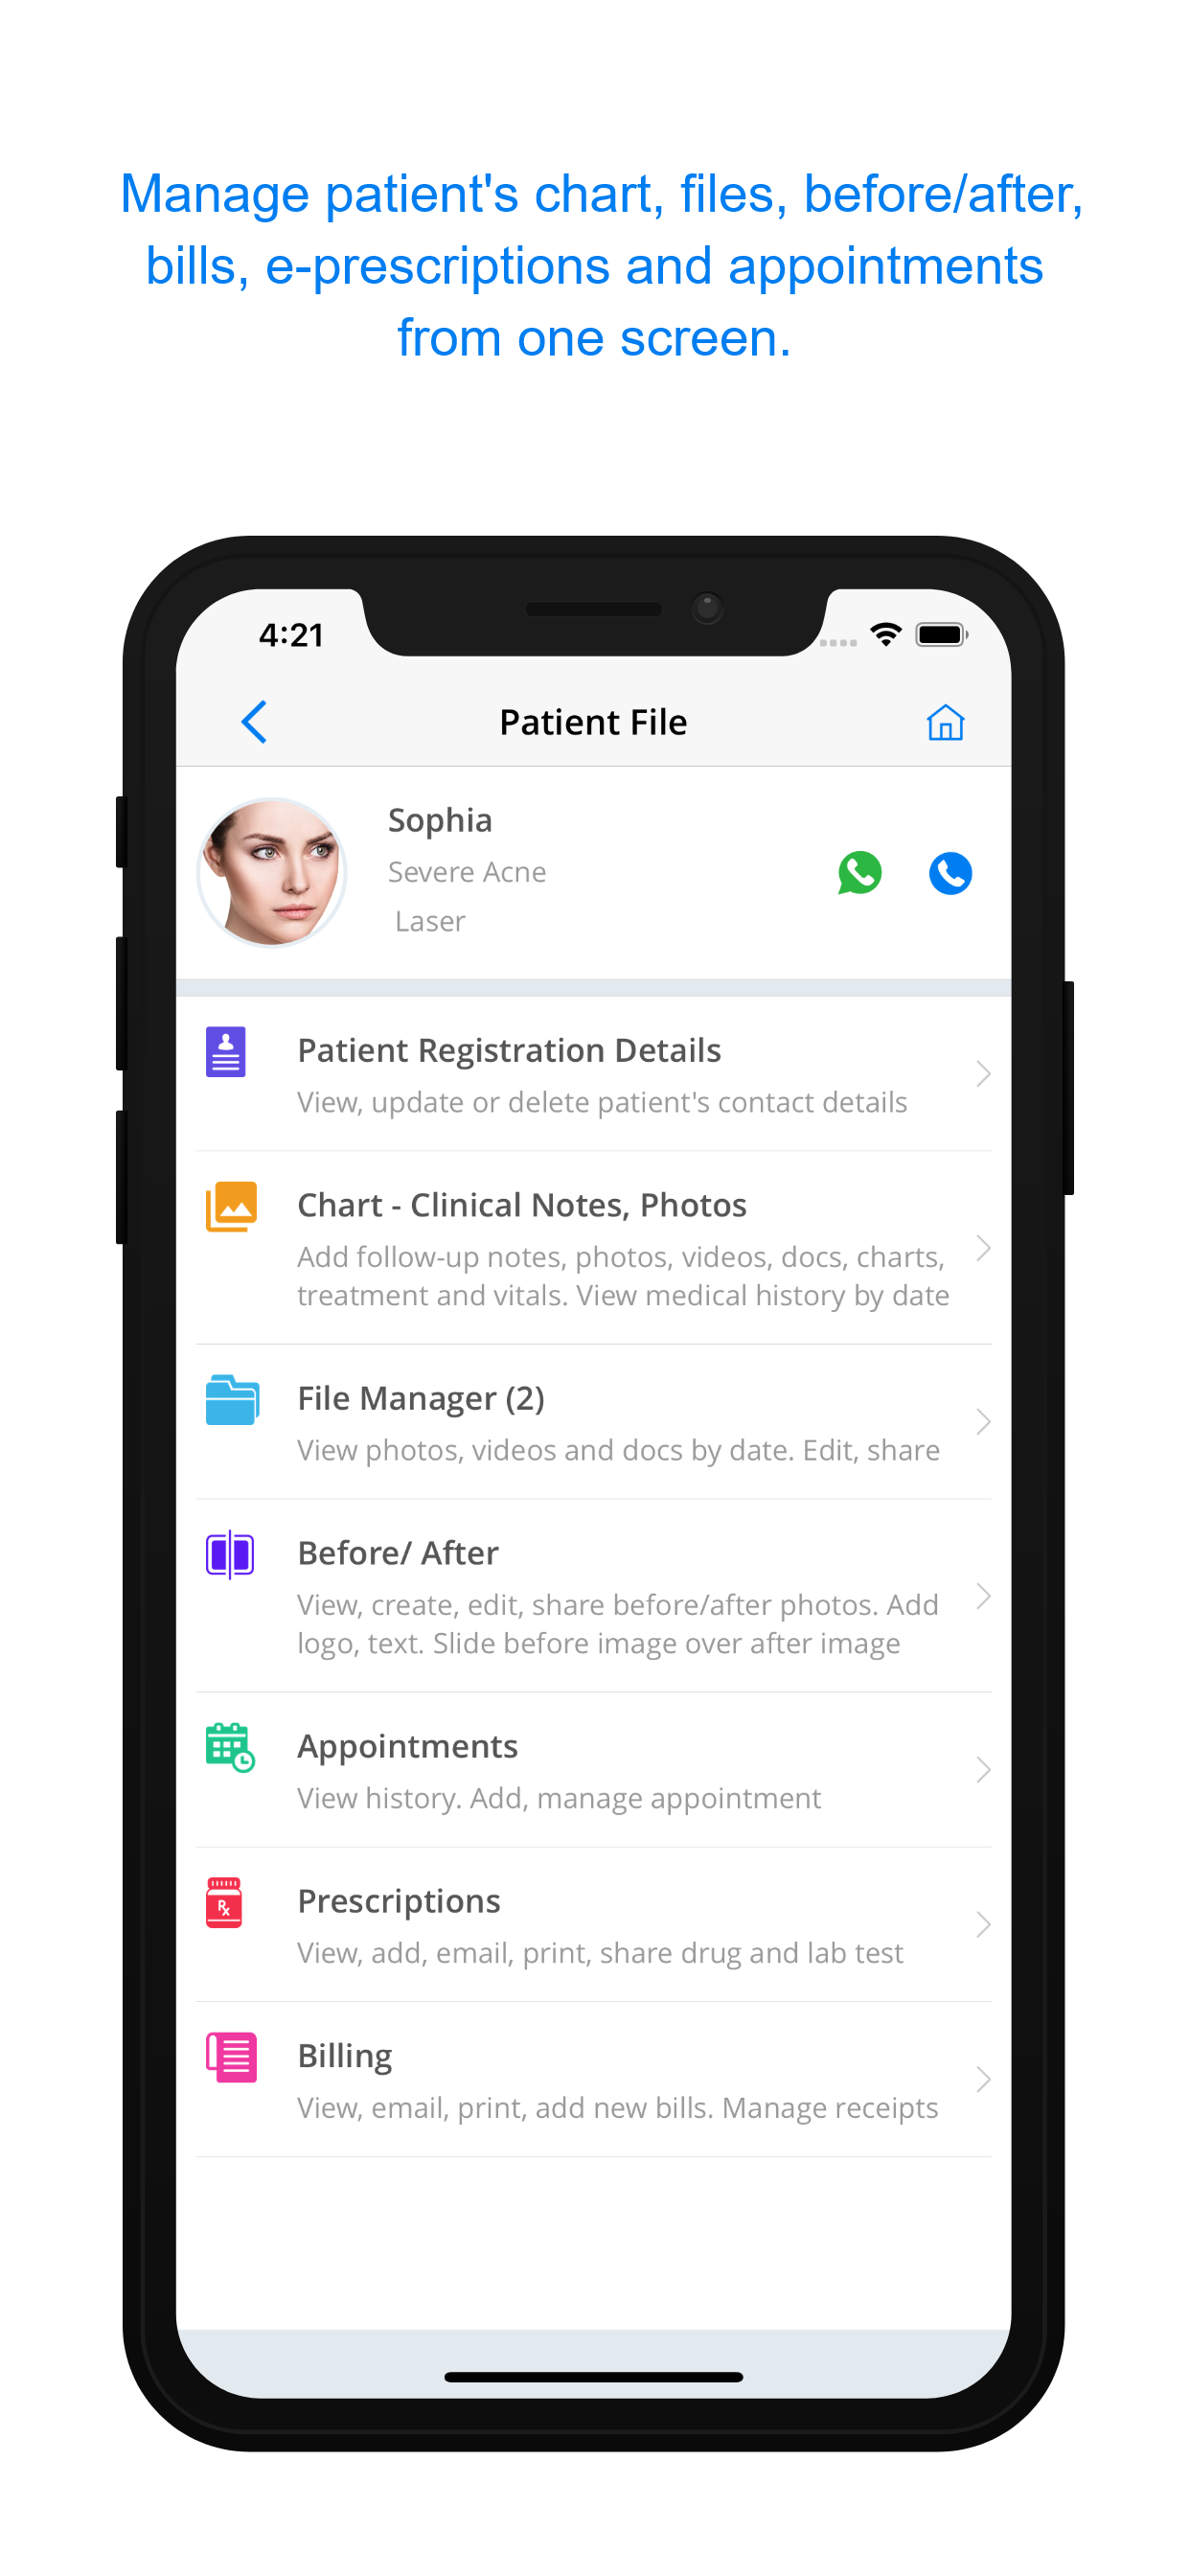 Manage all patient's records from one screen